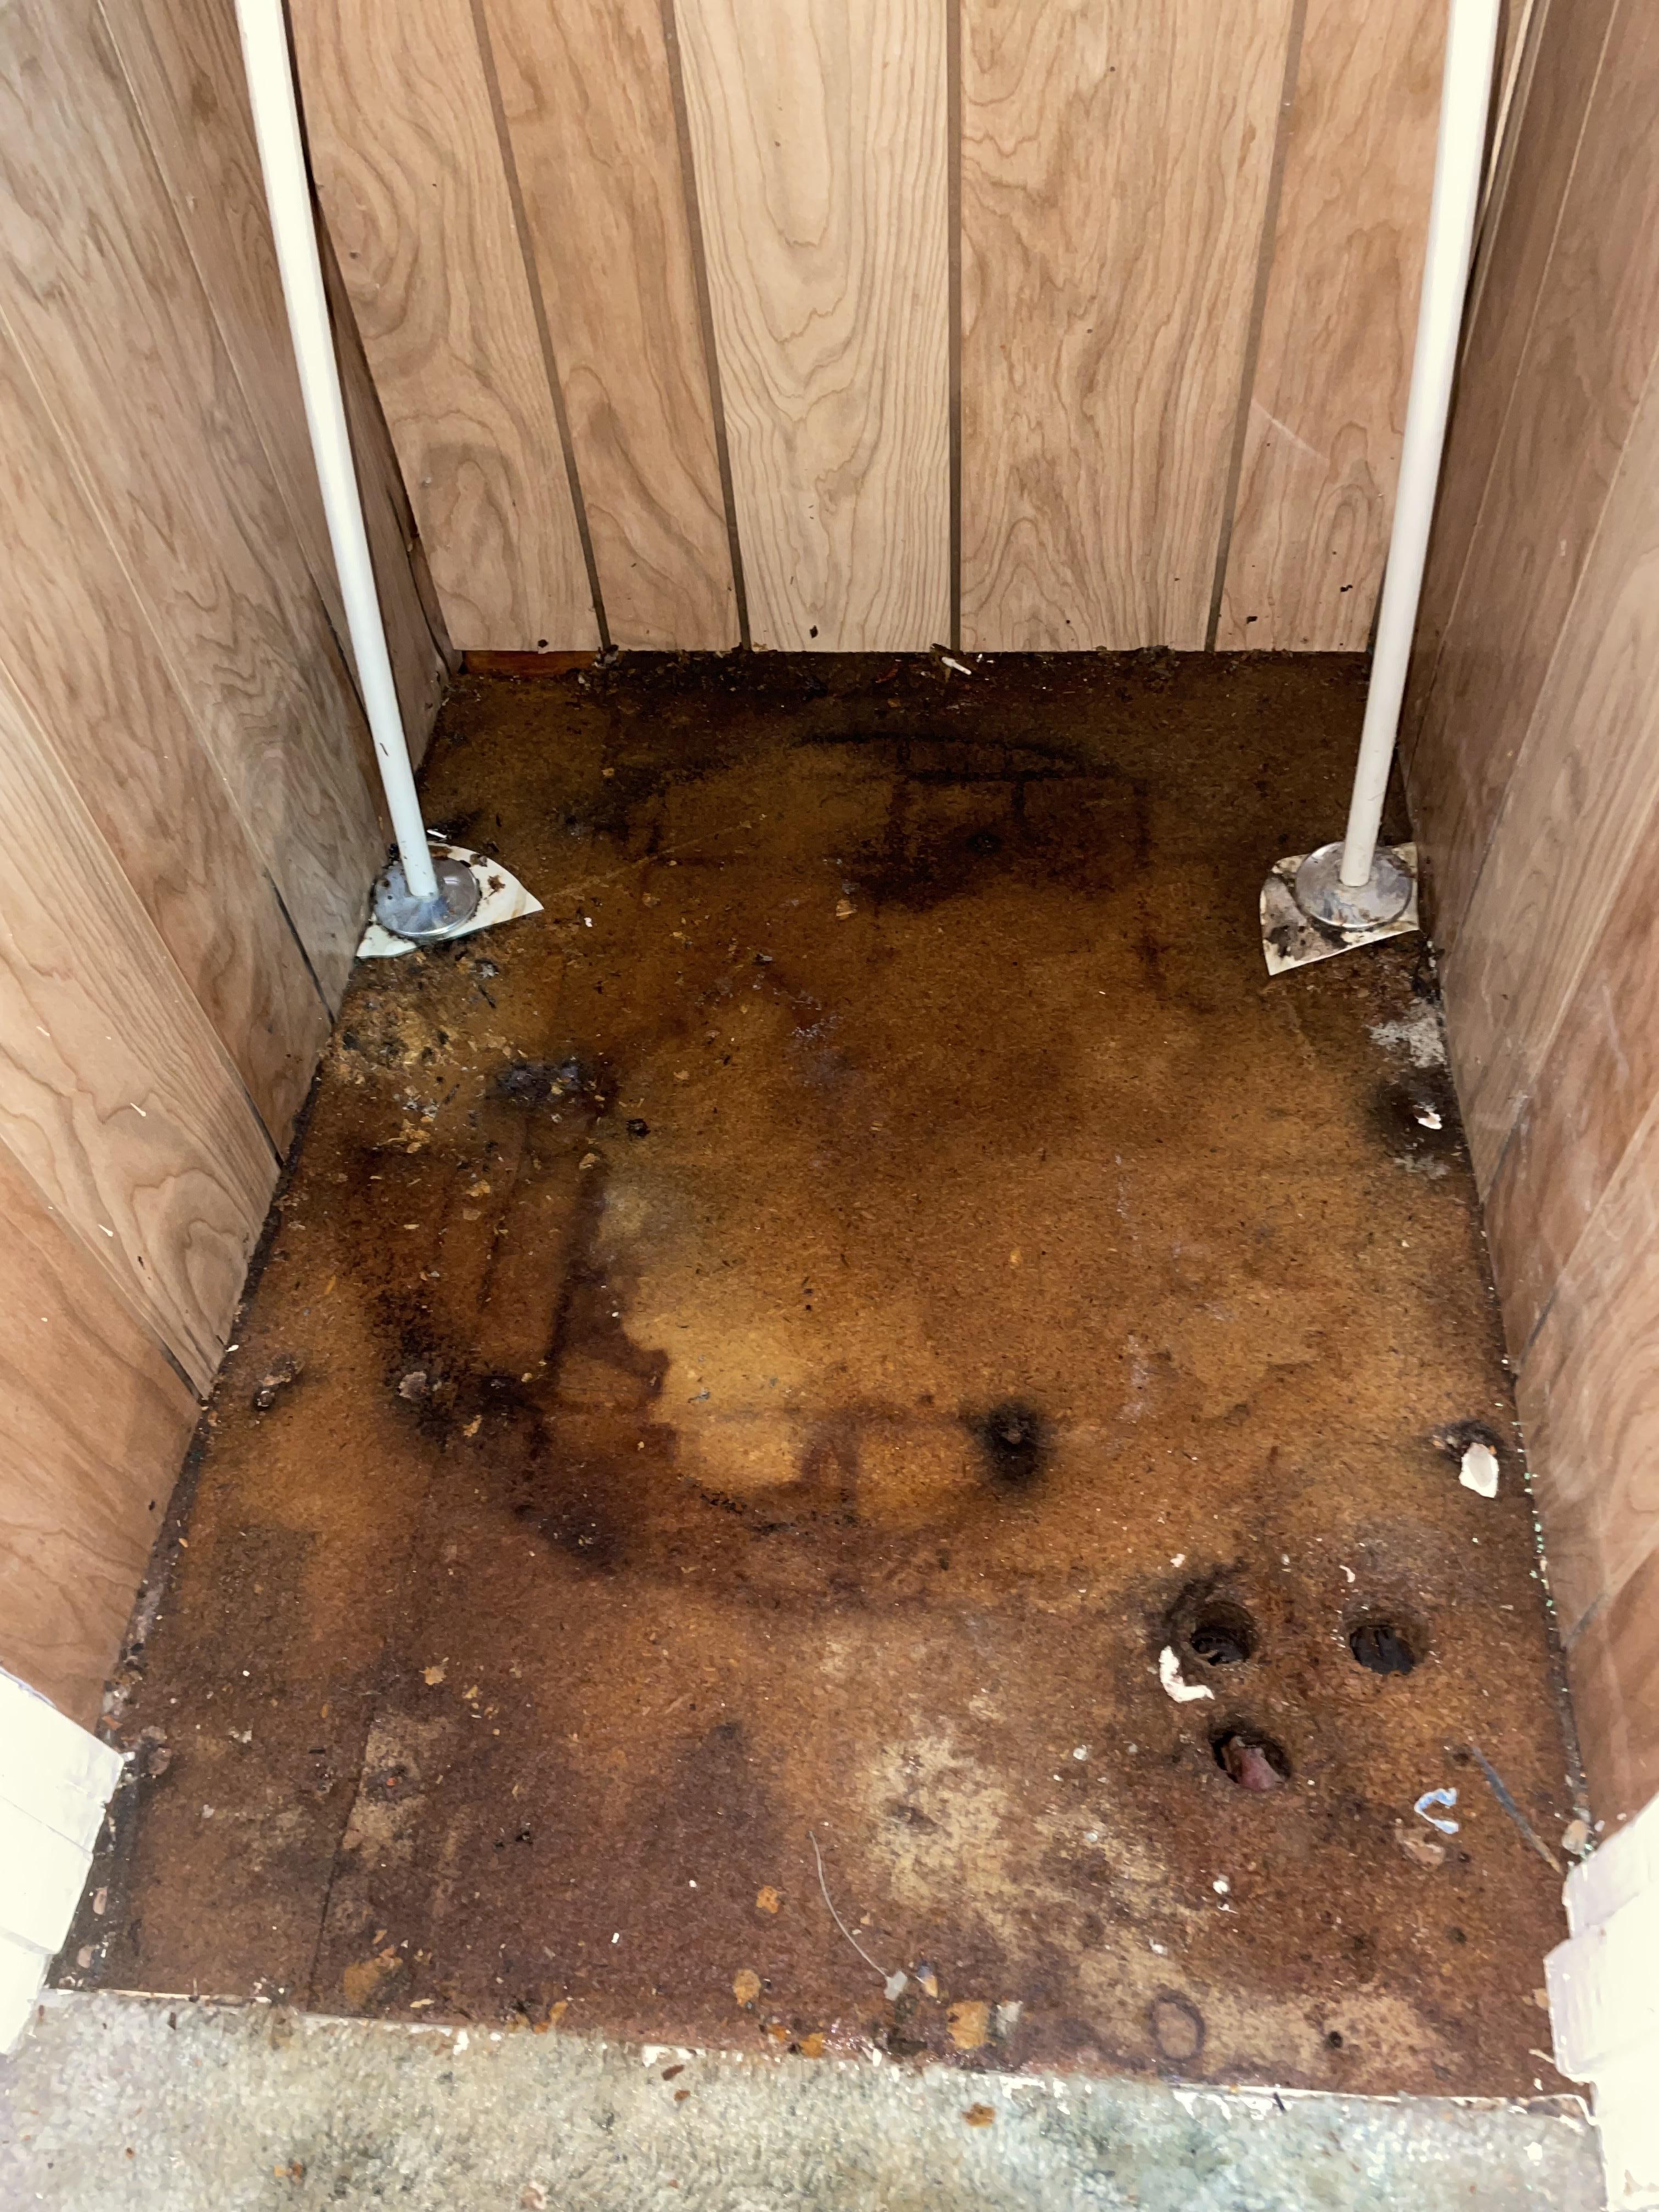 Removed flooring where the water heater was